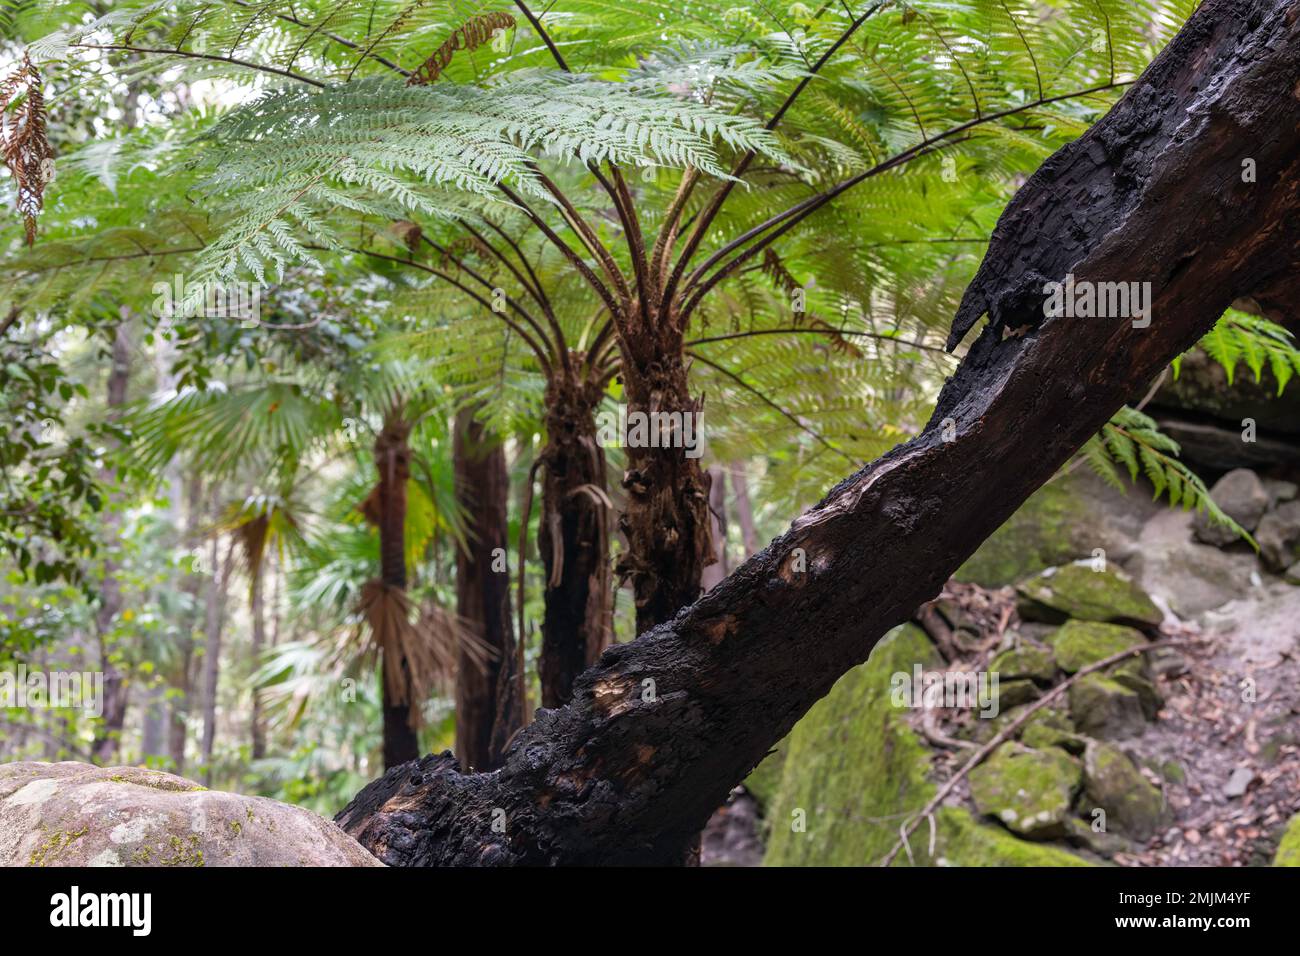 A charred tree trunk in front of 4 Cyathea cooperi (Australian Tree Fern) ... A fast-growing single trunked tall and elegant tree fern with long sprea Stock Photo